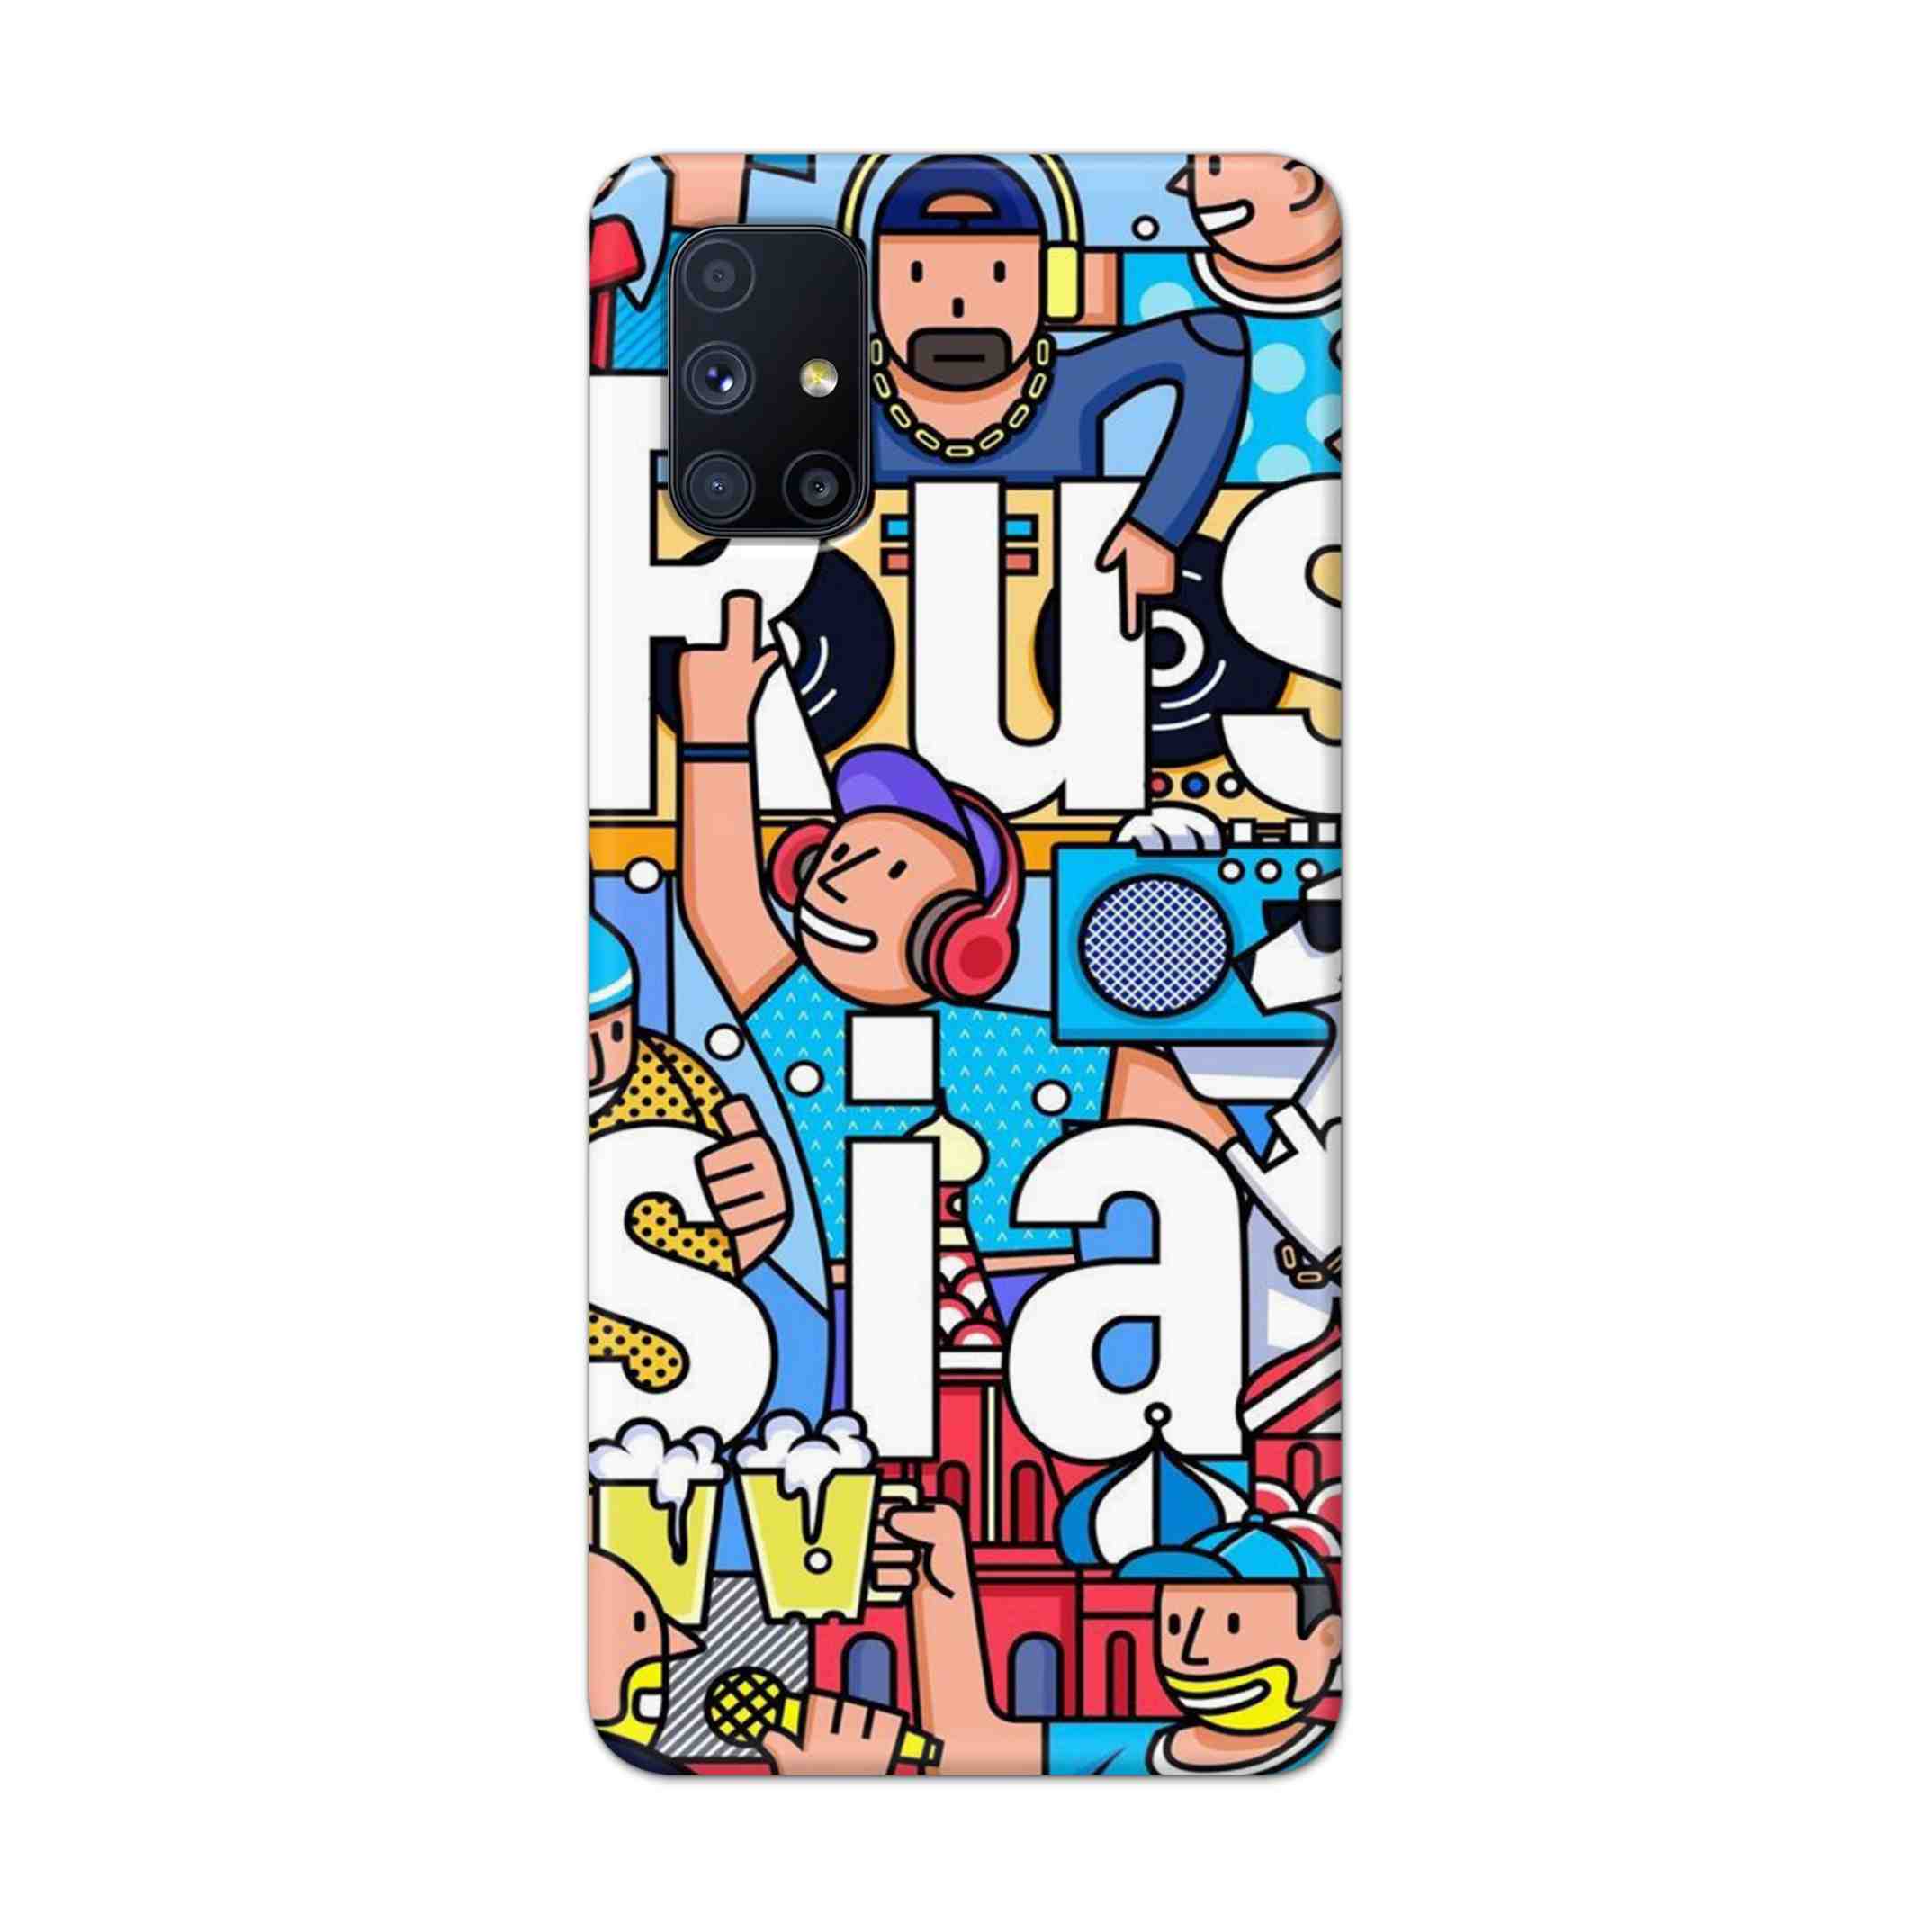 Buy Russia Hard Back Mobile Phone Case Cover For Samsung Galaxy M51 Online